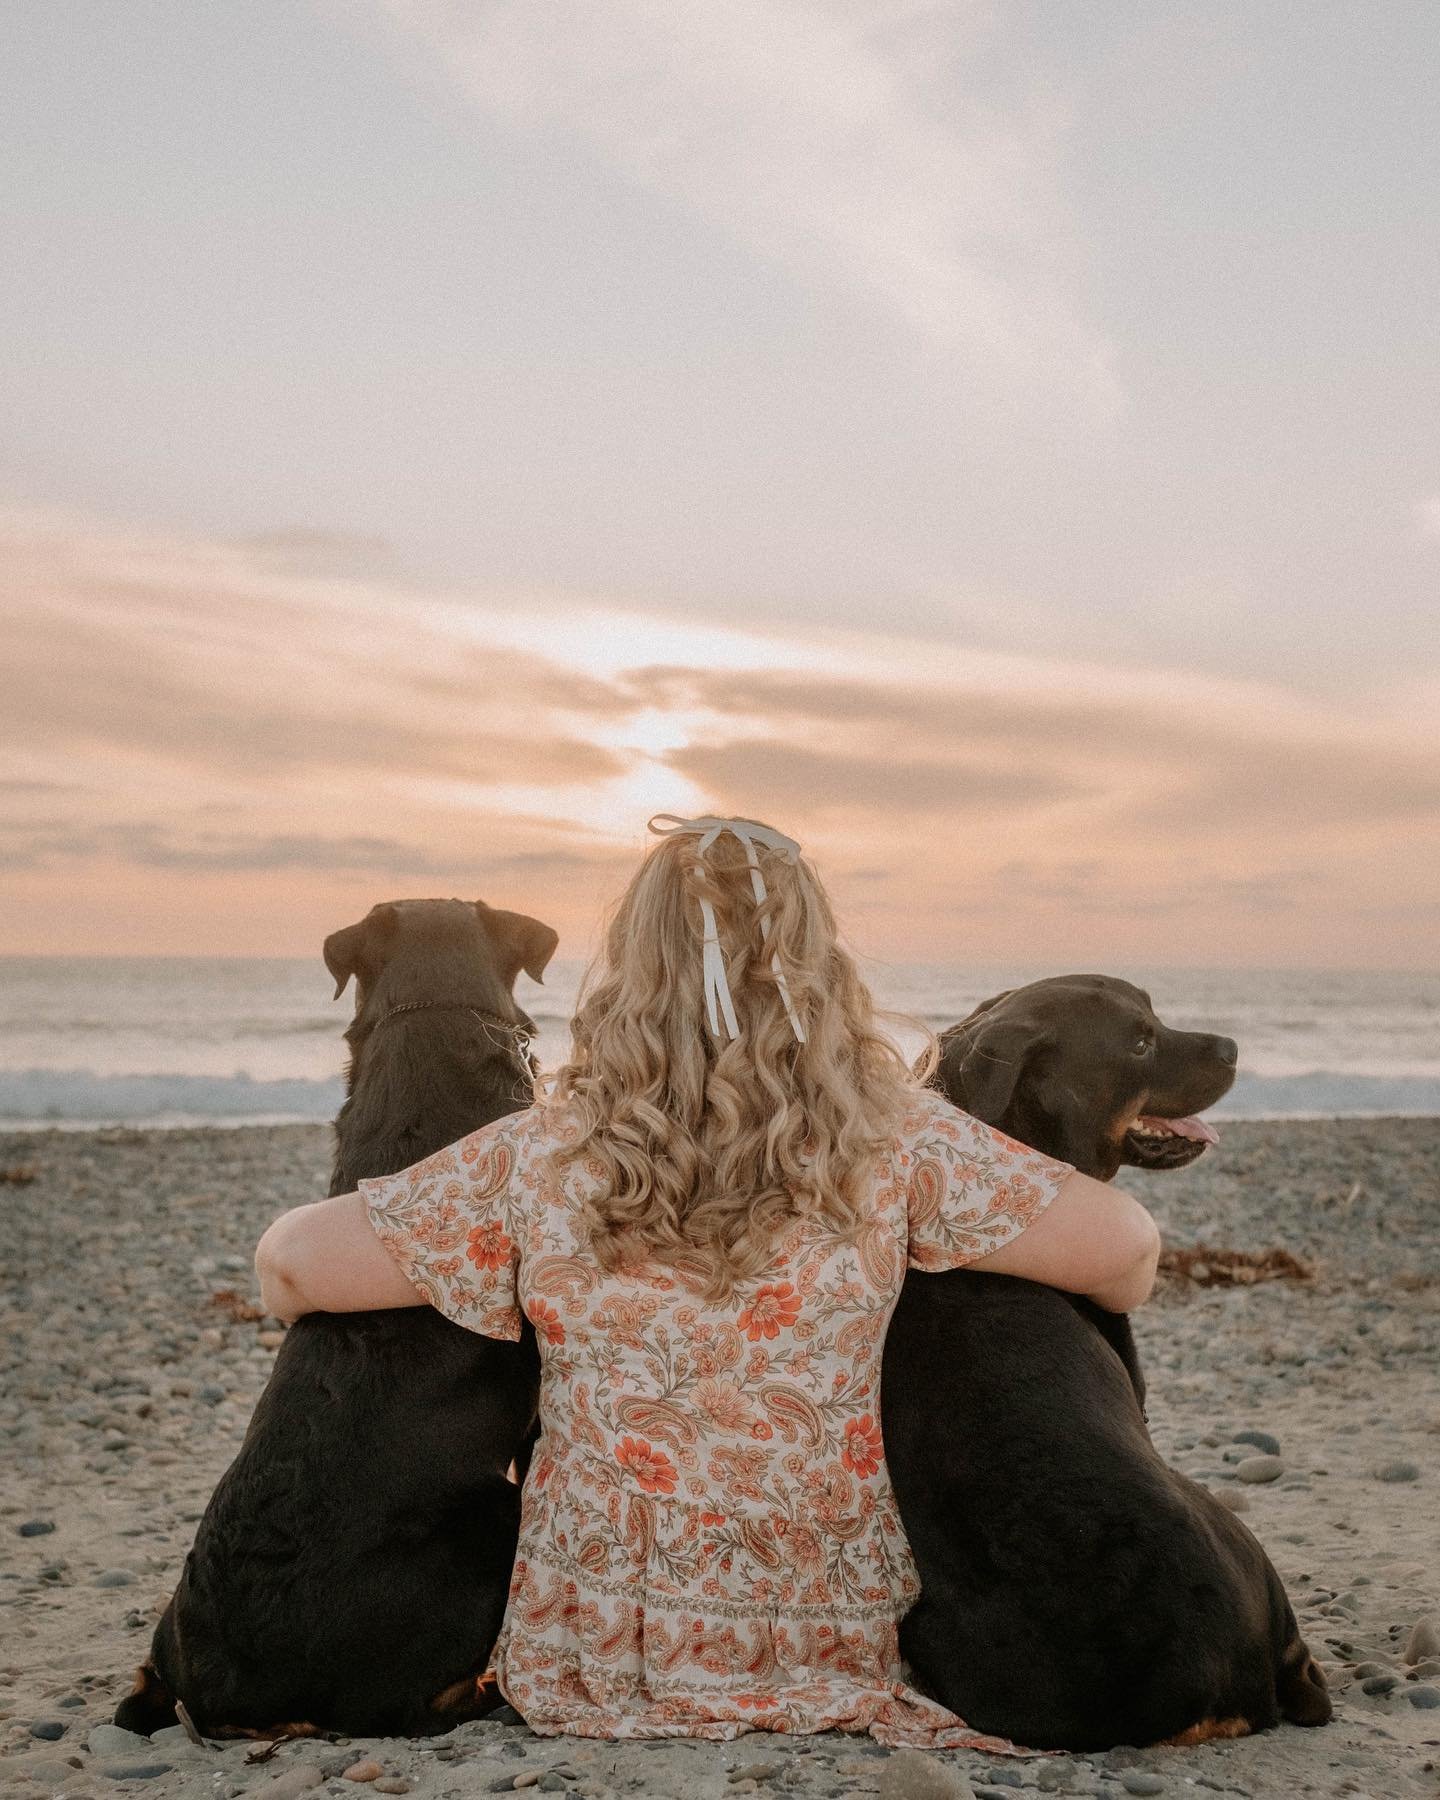 @kirstentappan and her rottie babies have been part of my photography journey since the beginning! This was our fourth session together. The love between a girl and her dogs is one of my absolute favorite things to capture. Thank you @kirstentappan f